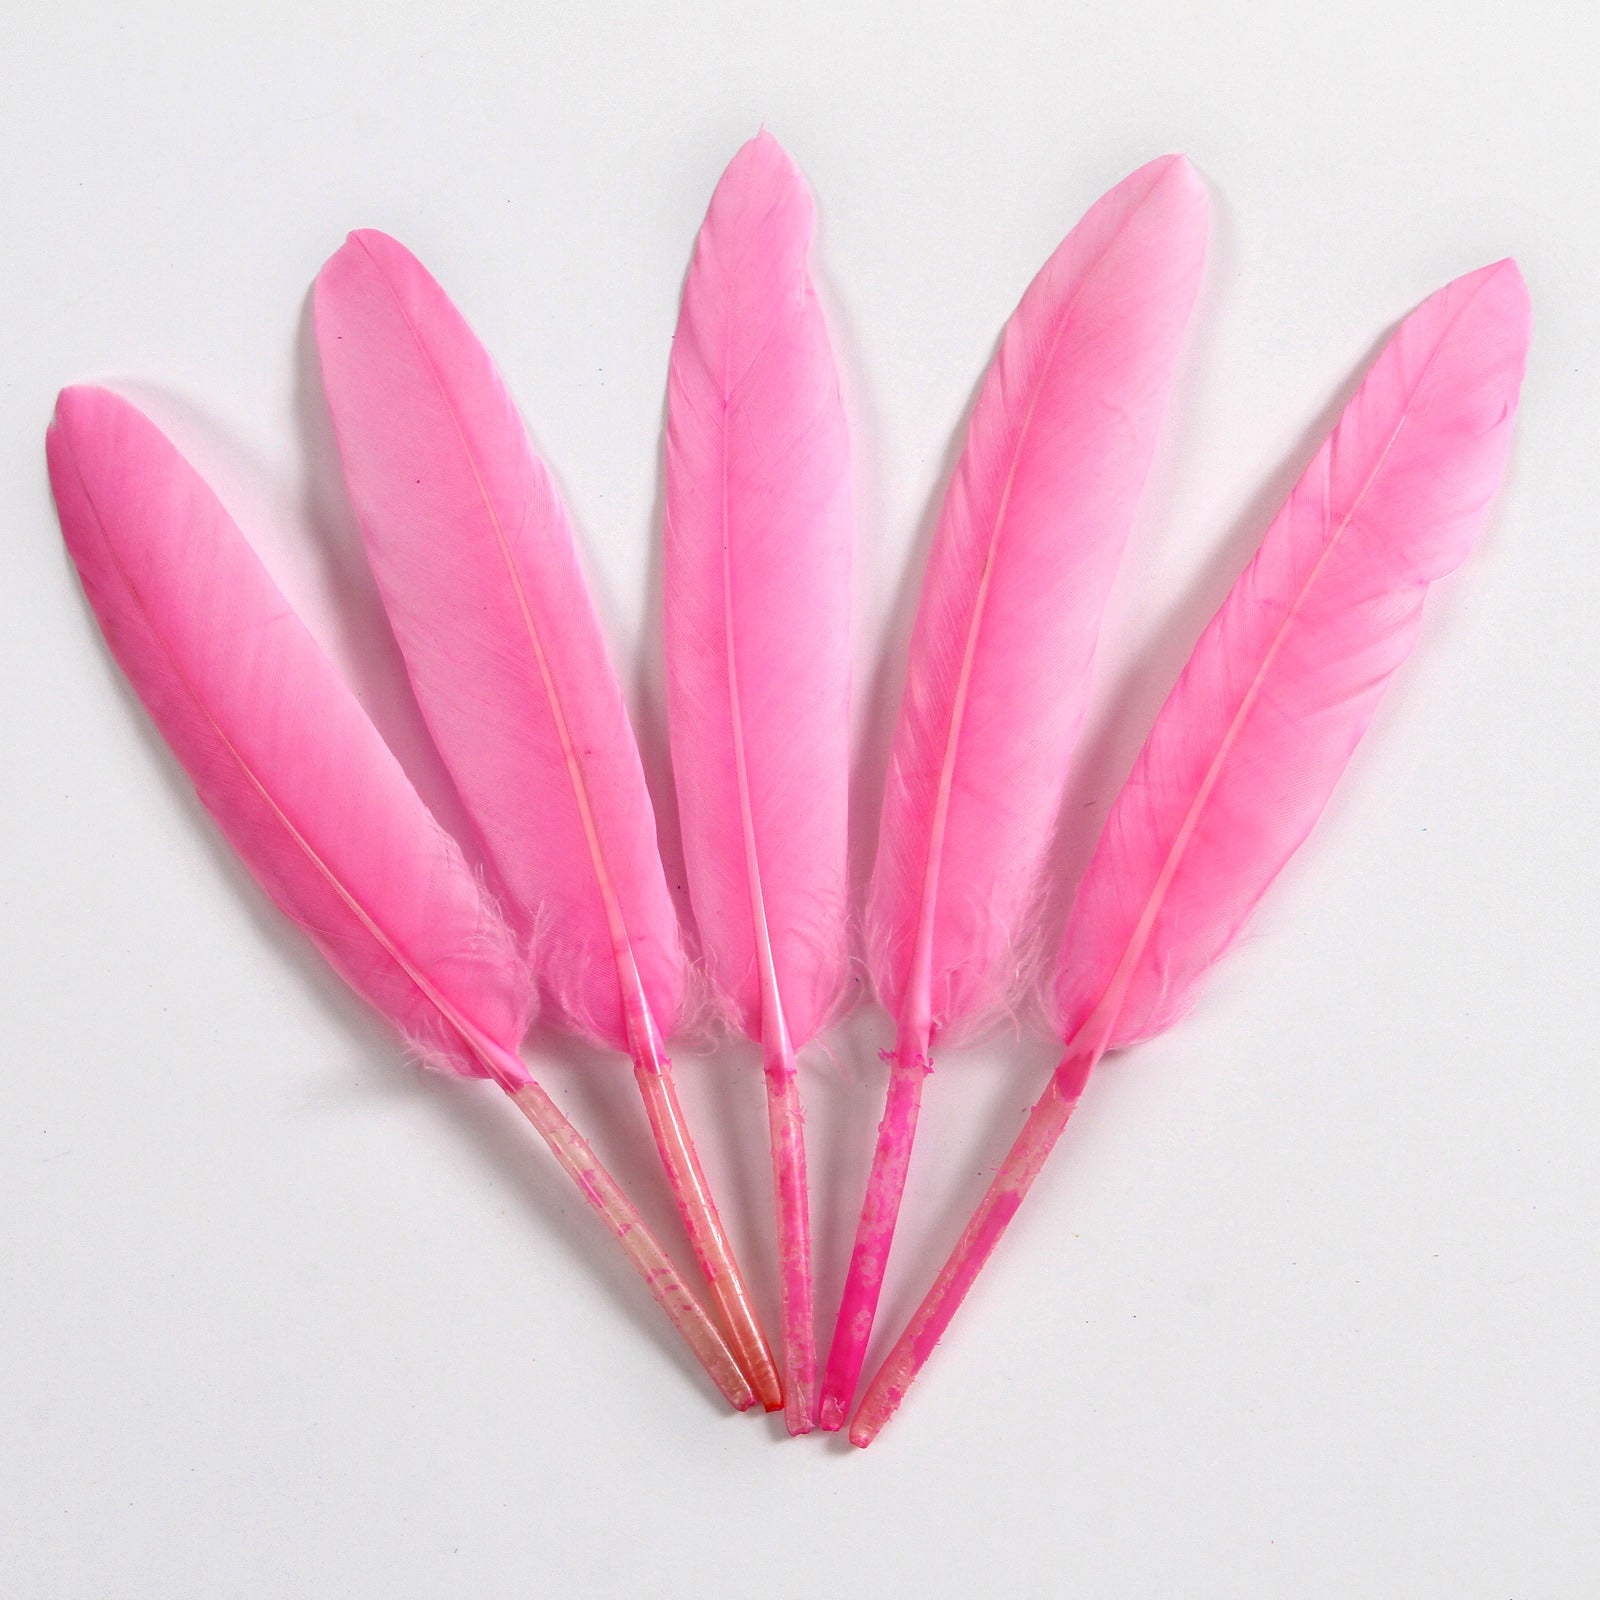 7-9 Inch Long Pink Feathers. Magenta Bird Quills for Making